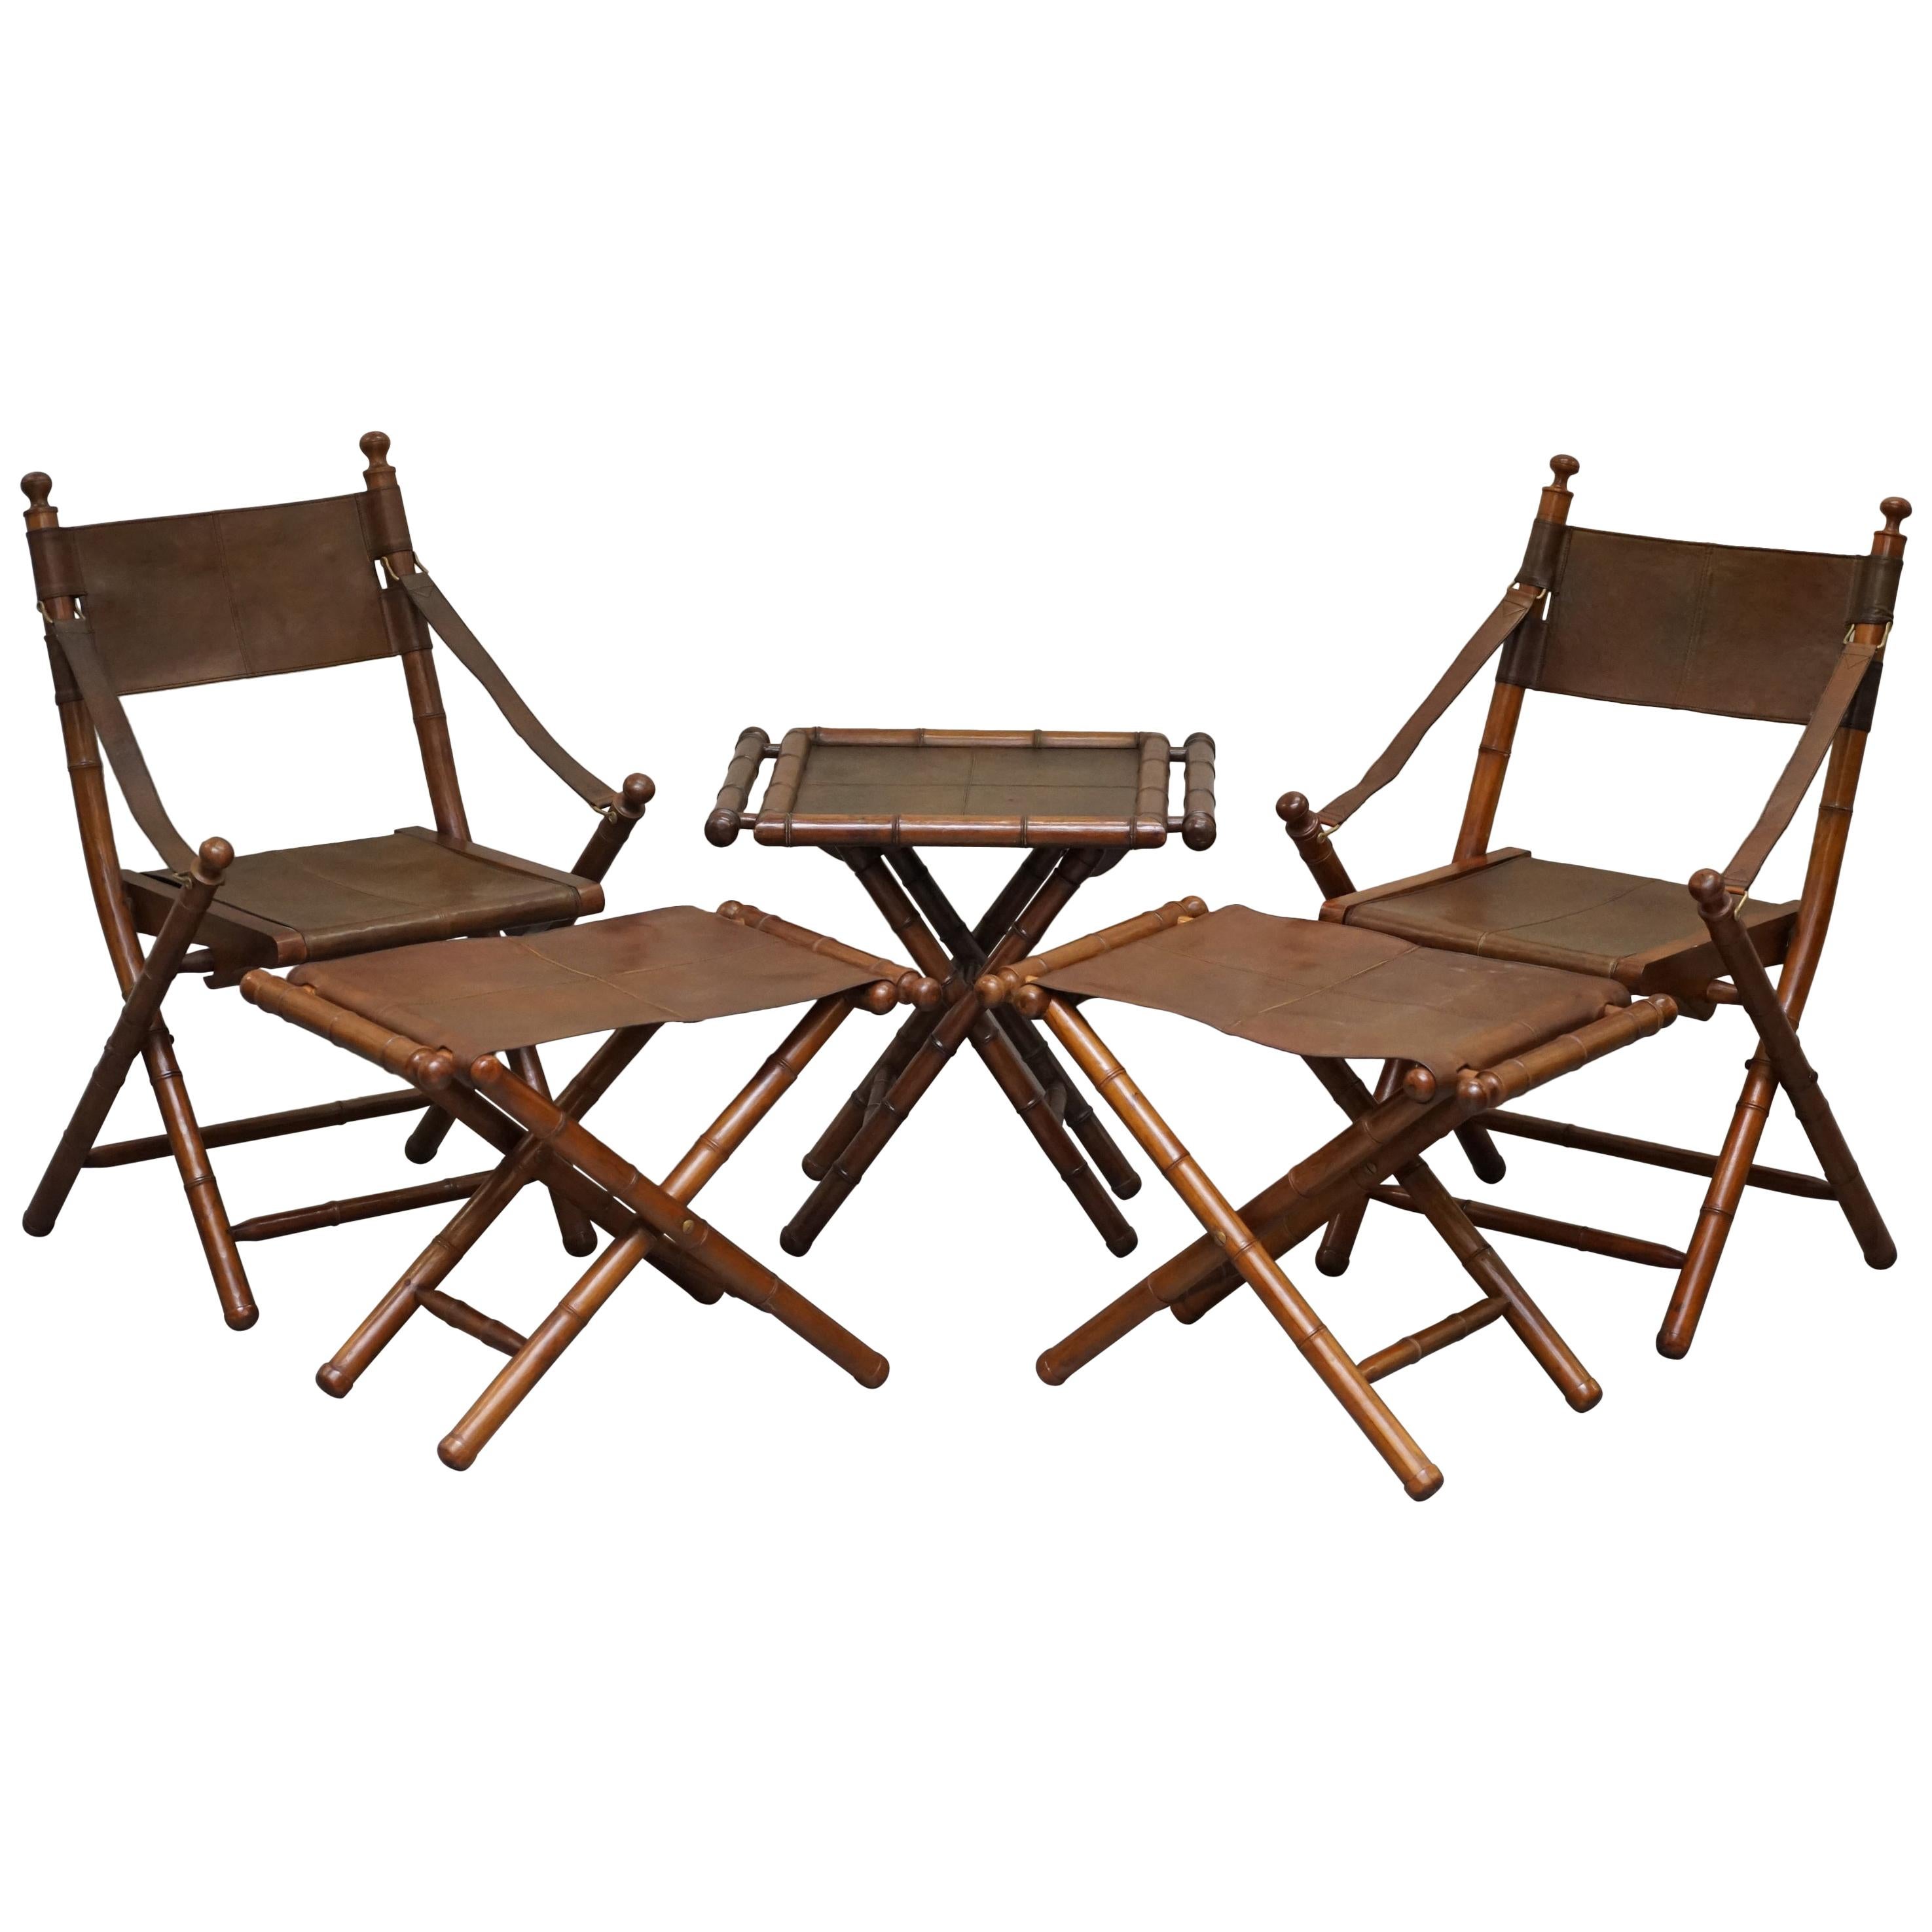 Suite of Vintage Brown Leather Steamer Folding Armchairs, Stools & Coffee Table